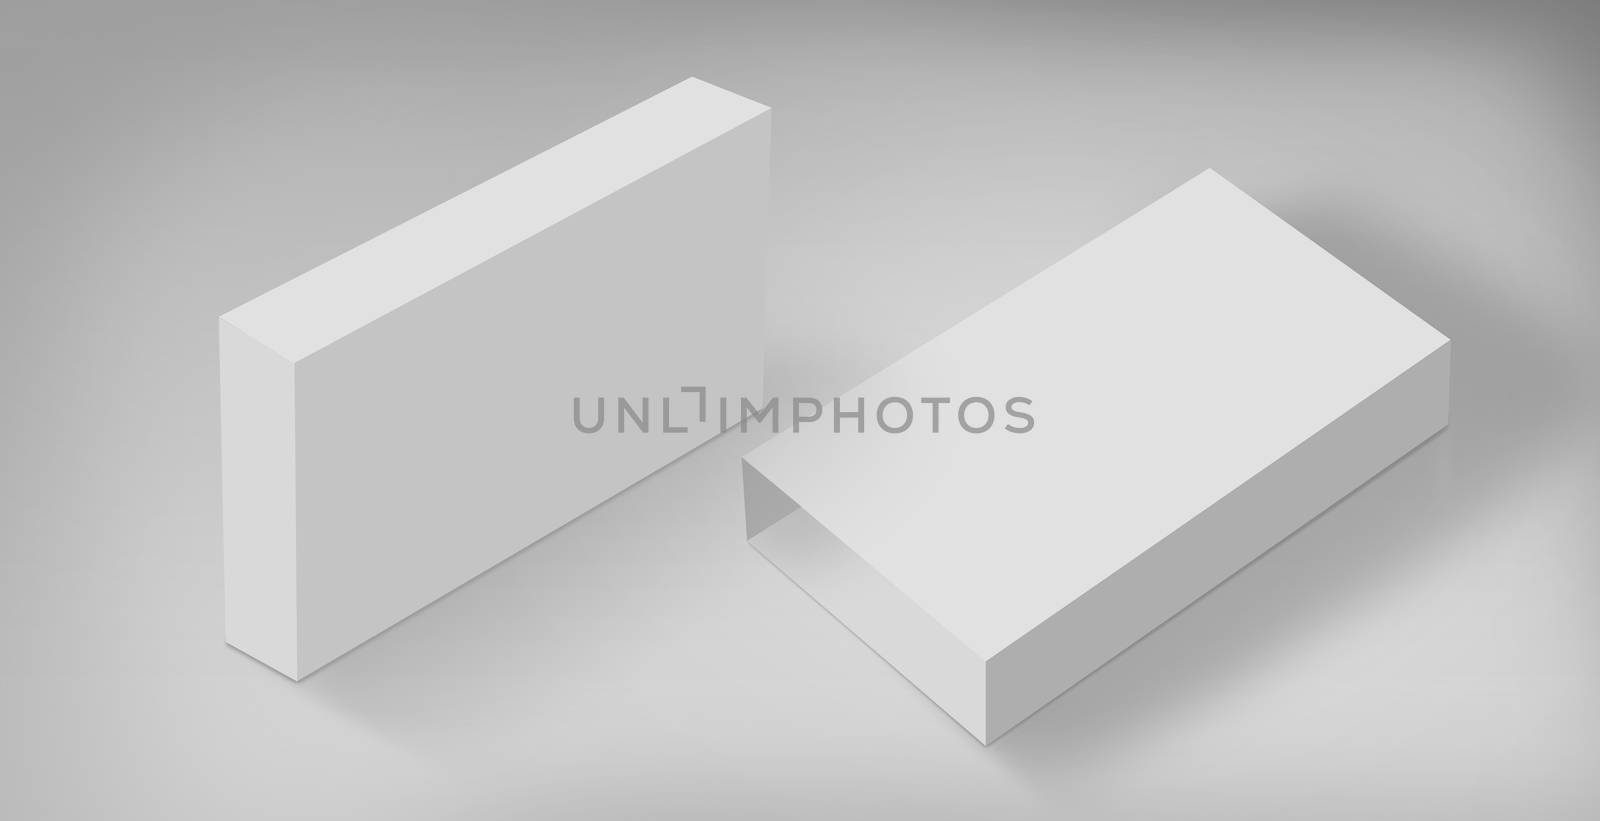 3D White Boxes on Ground Concept Series by bluemoon1981